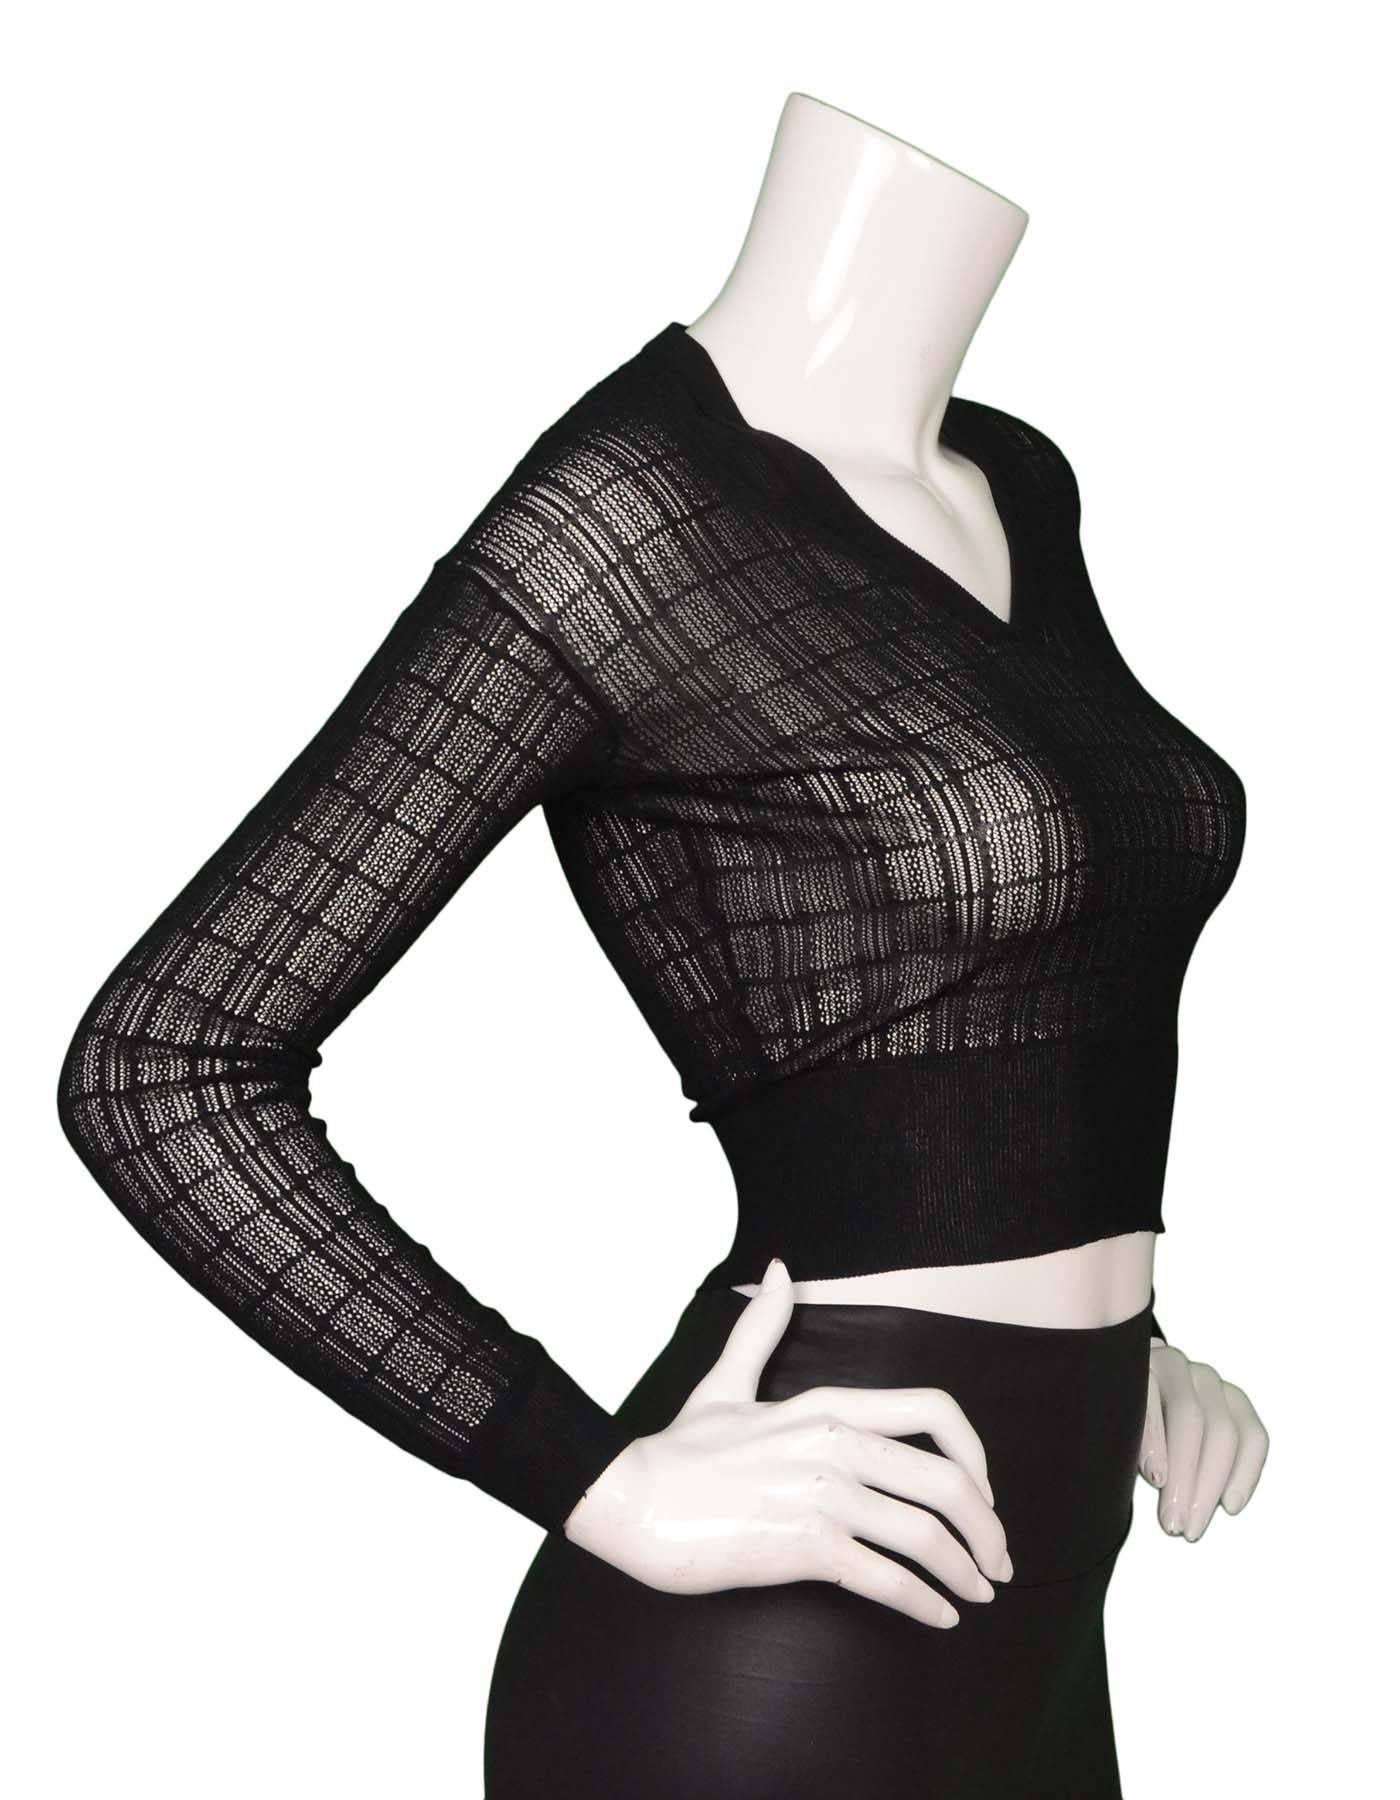 Alaia Black Knit Crop Top
Made In: Italy
Color: Black
Composition: 94% viscose, 6% polyester
Lining: None
Closure/Opening: Pull over
Exterior Pockets: None
Interior Pockets: None
Overall Condition: Excellent pre-owned condition

Marked